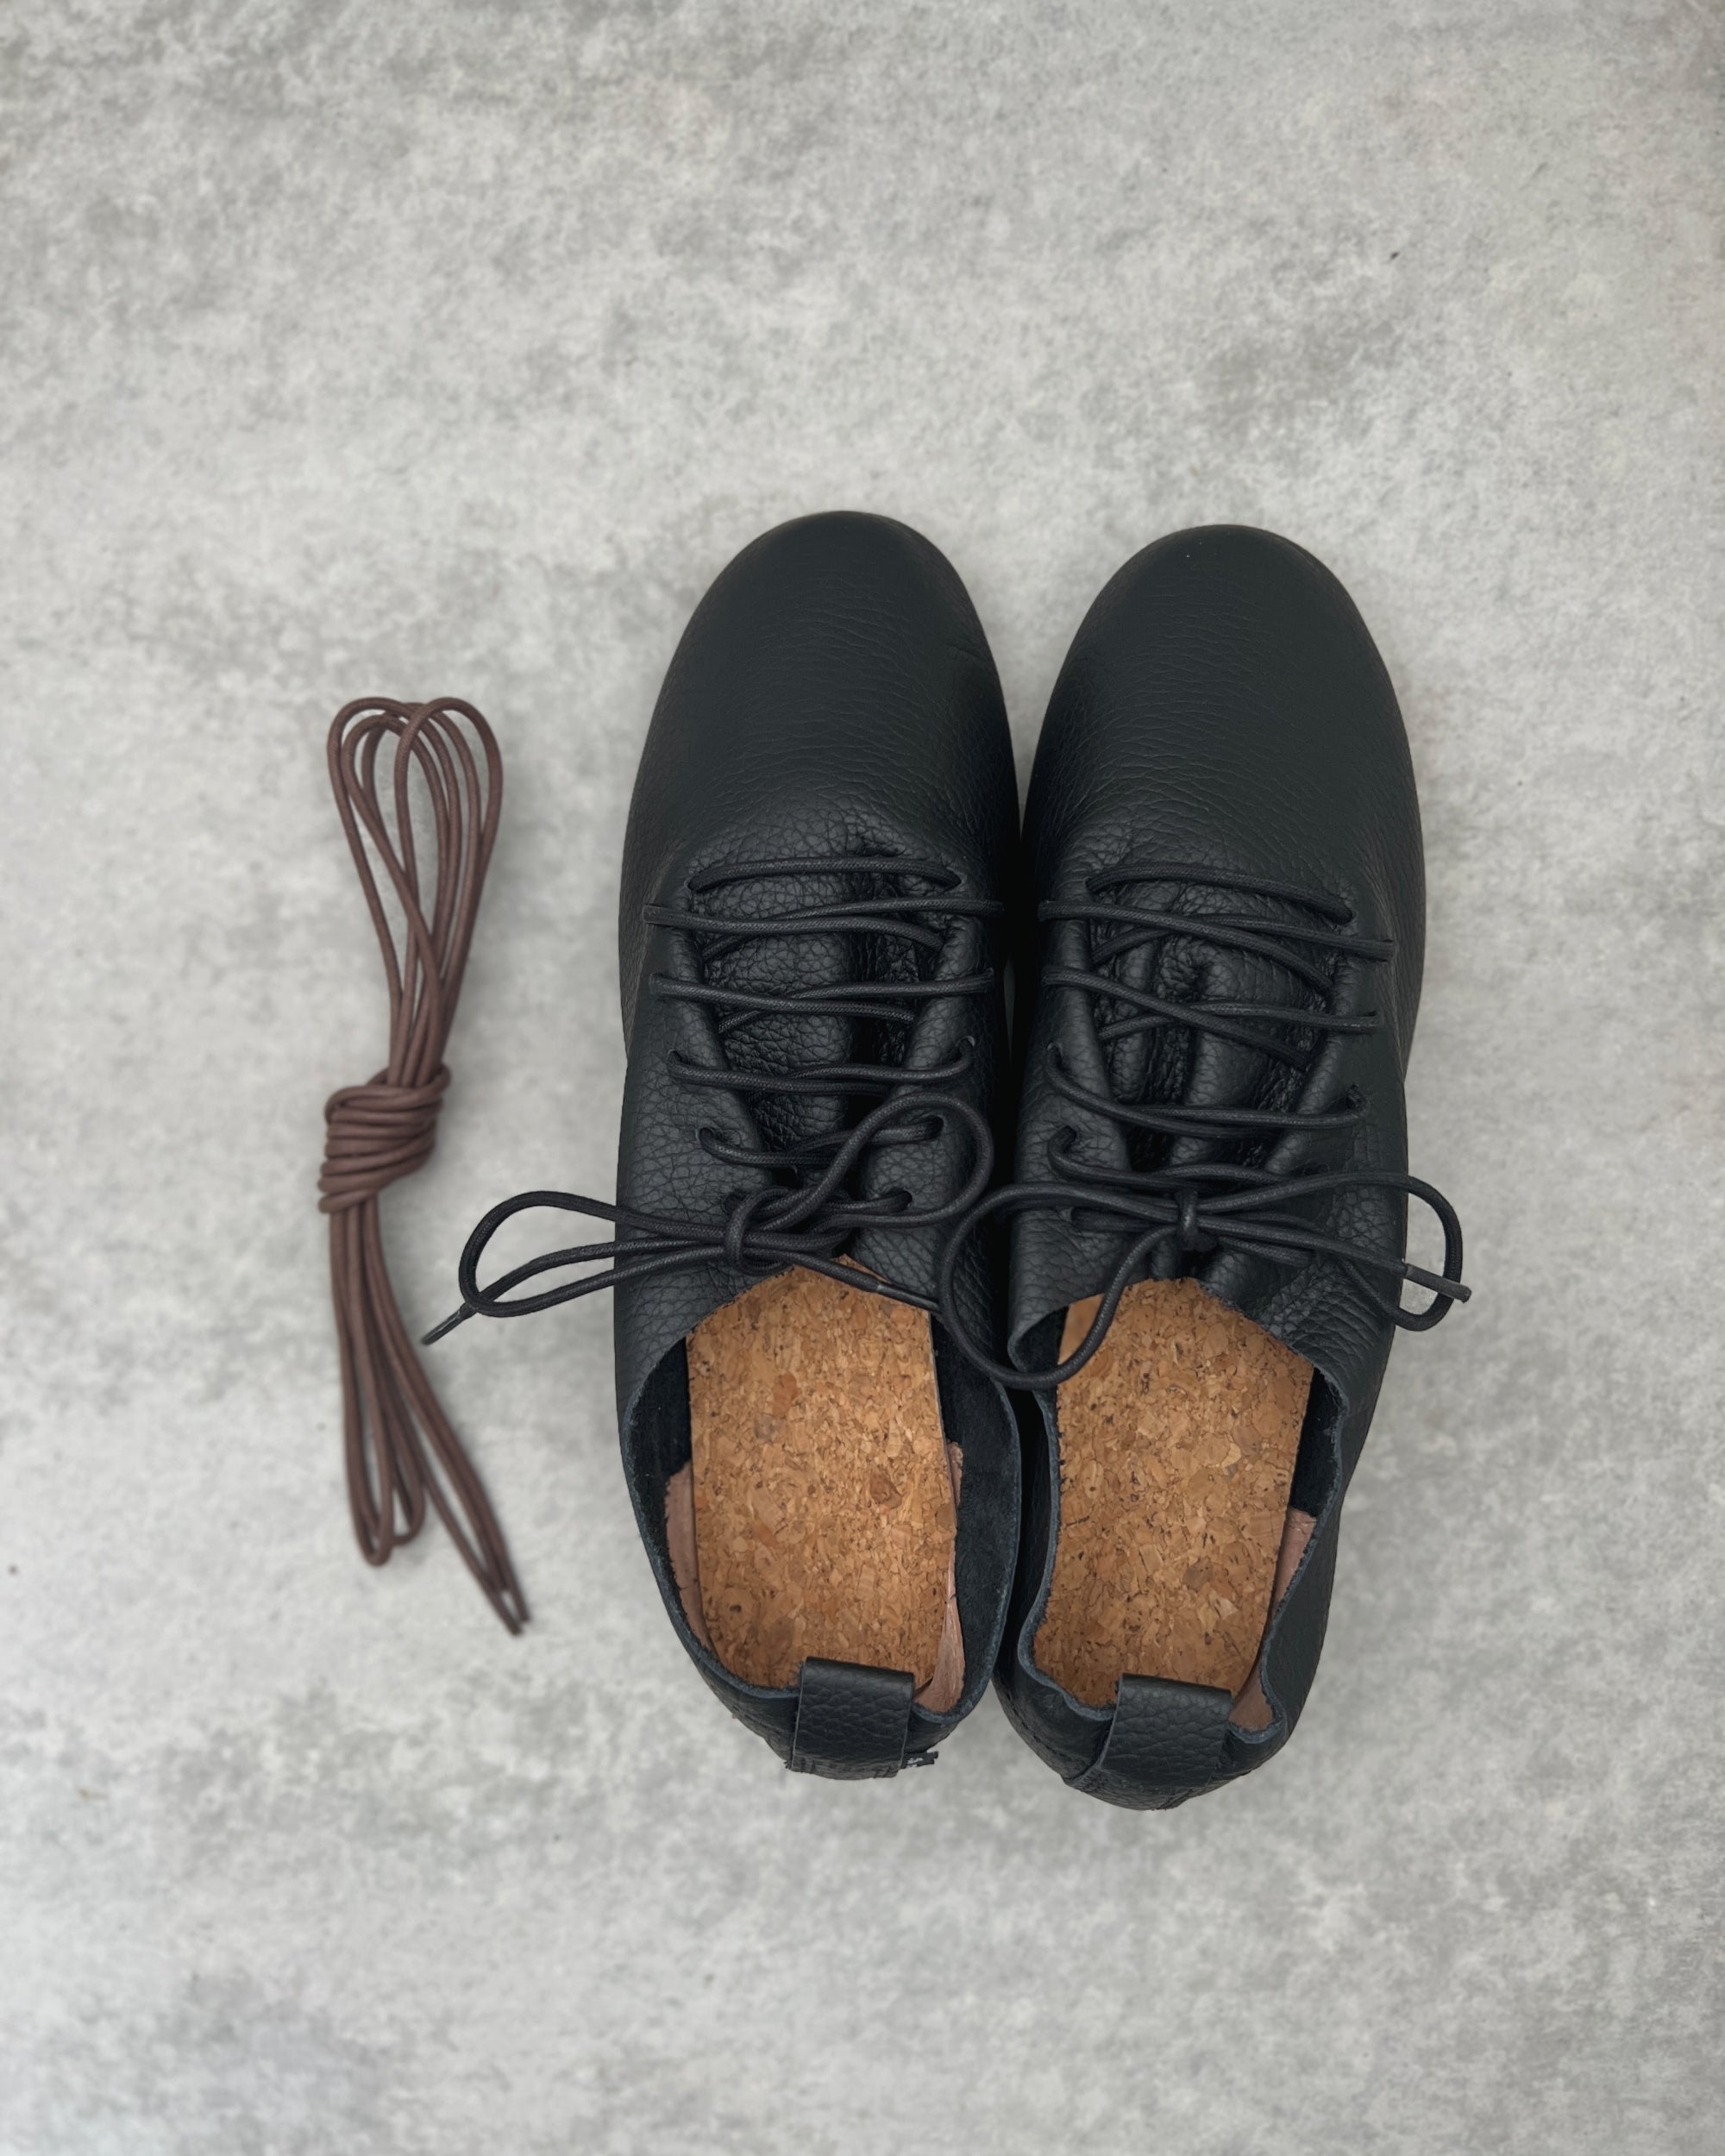 Japanese leather sneakers